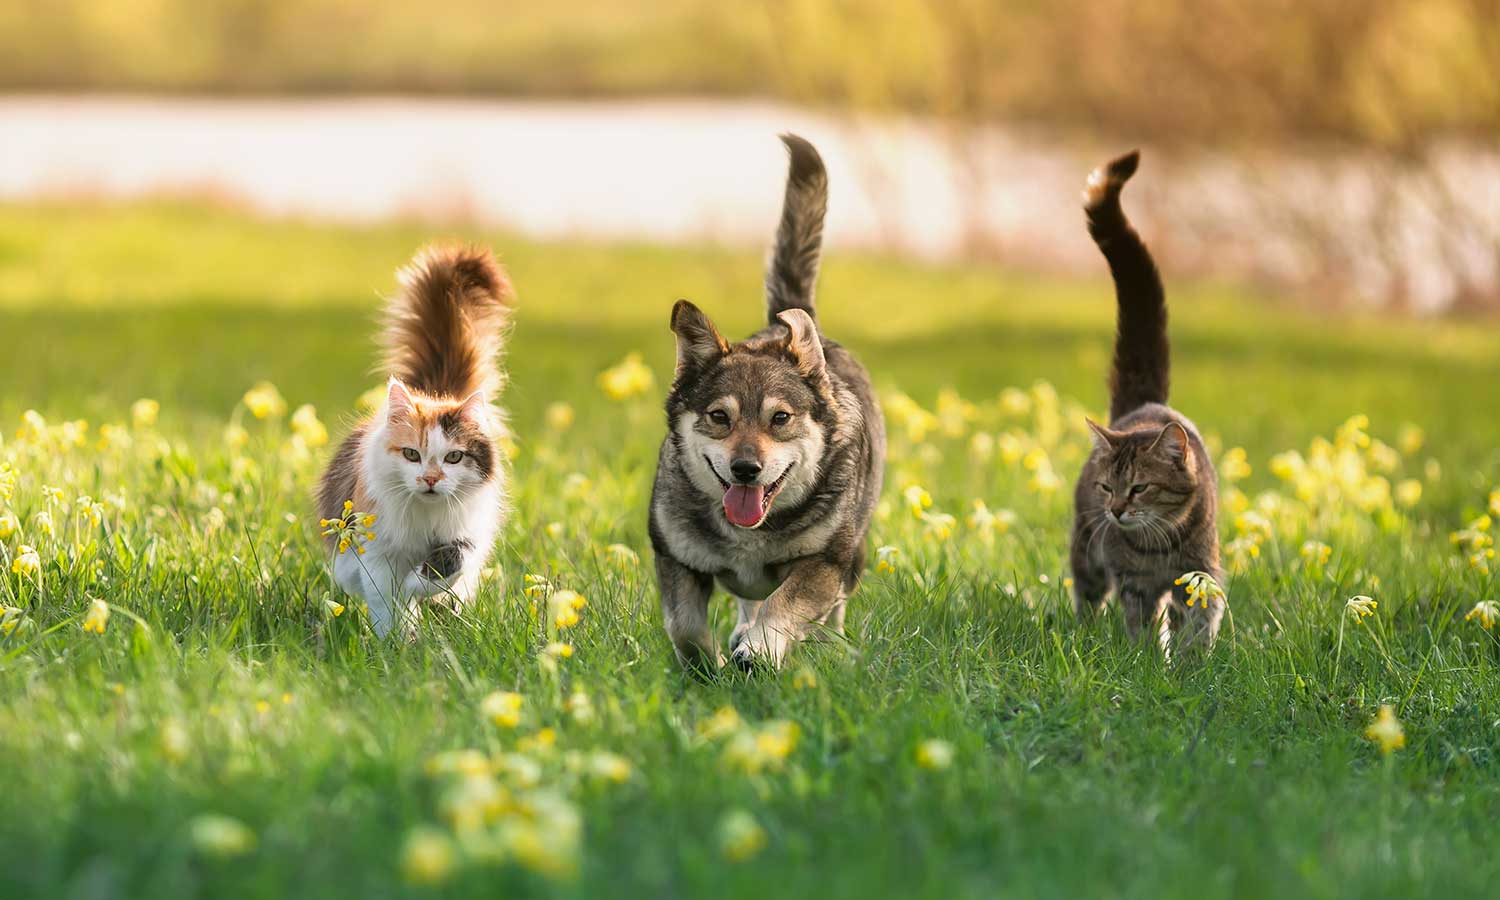 A dog out with its feline friends in a field